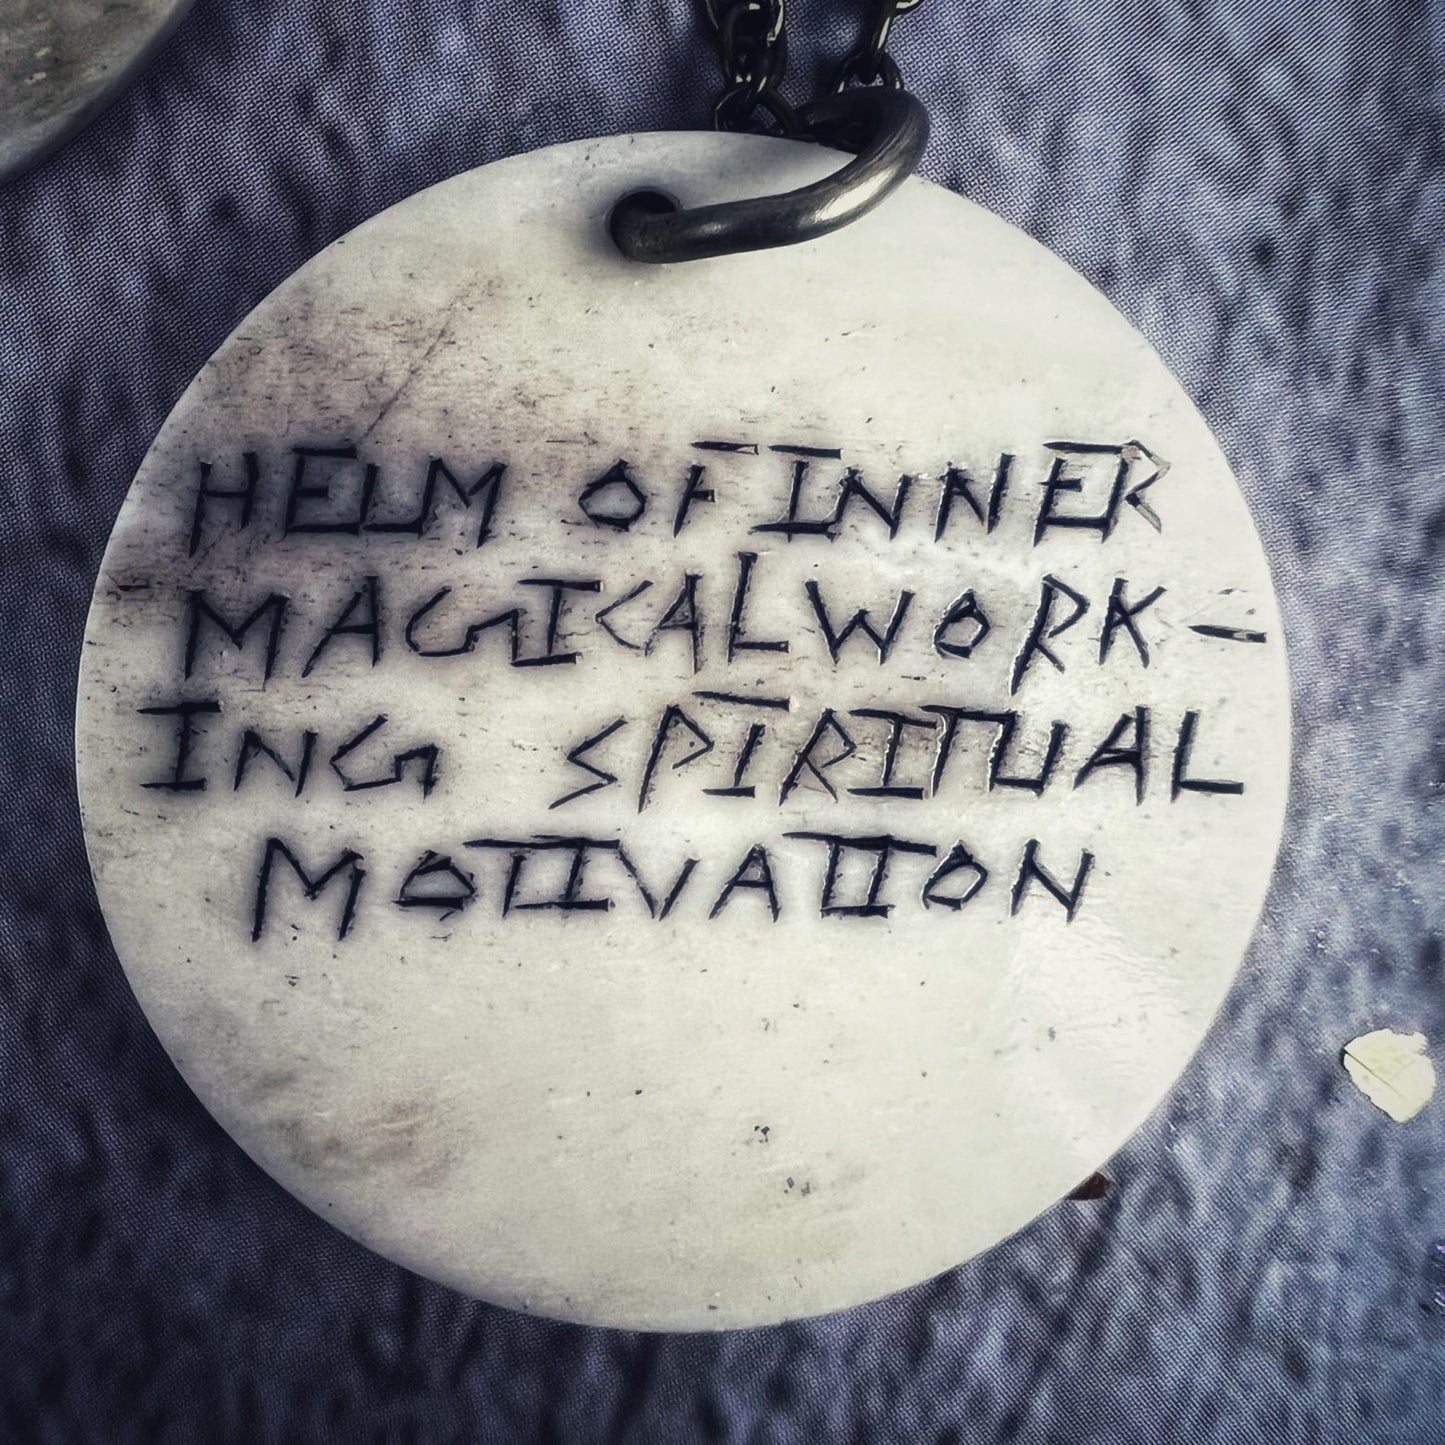 Helm of Inner Magical Working Spiritual Motivation Bone Charm Necklace